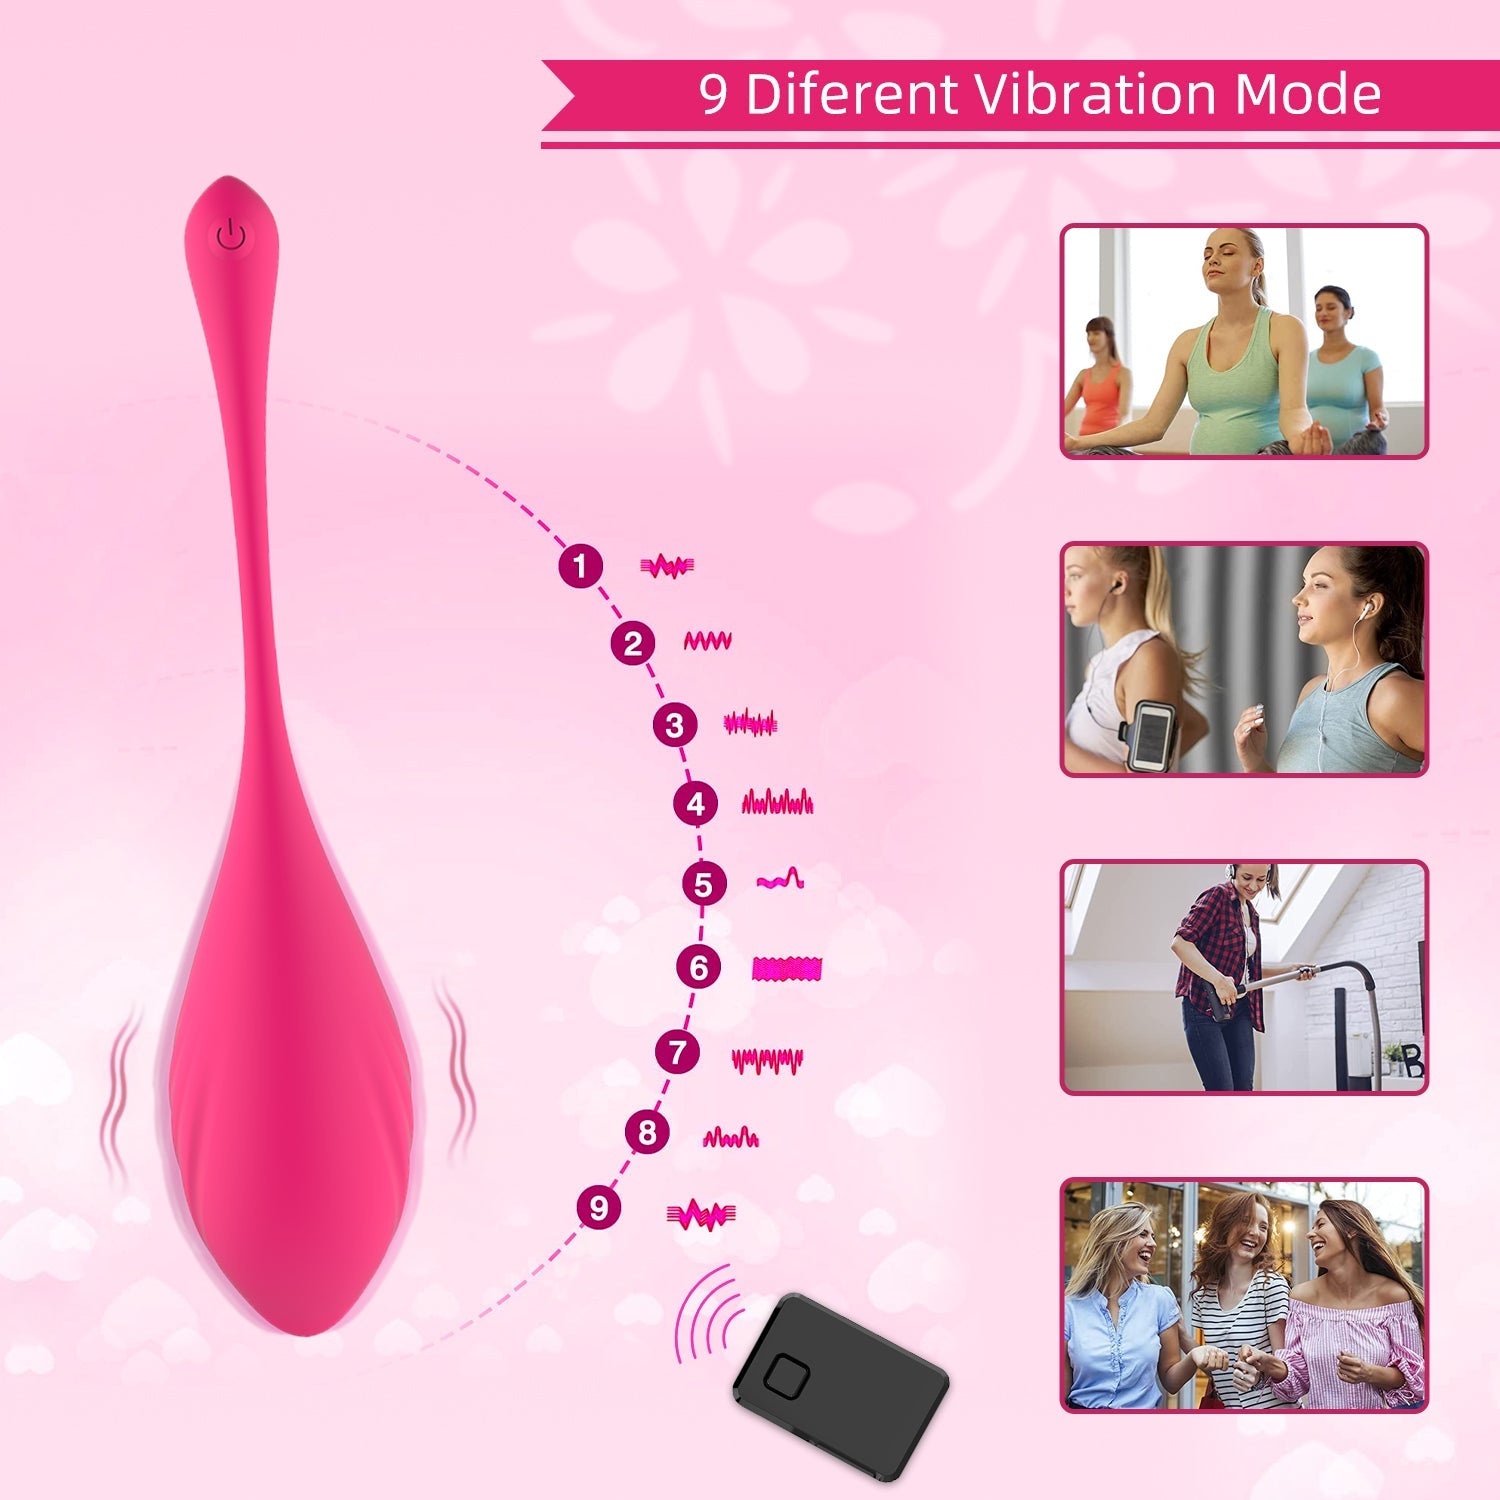 Remote control - you can use the mobile phone APP to vibrate the egg - Sexy-Fantasy